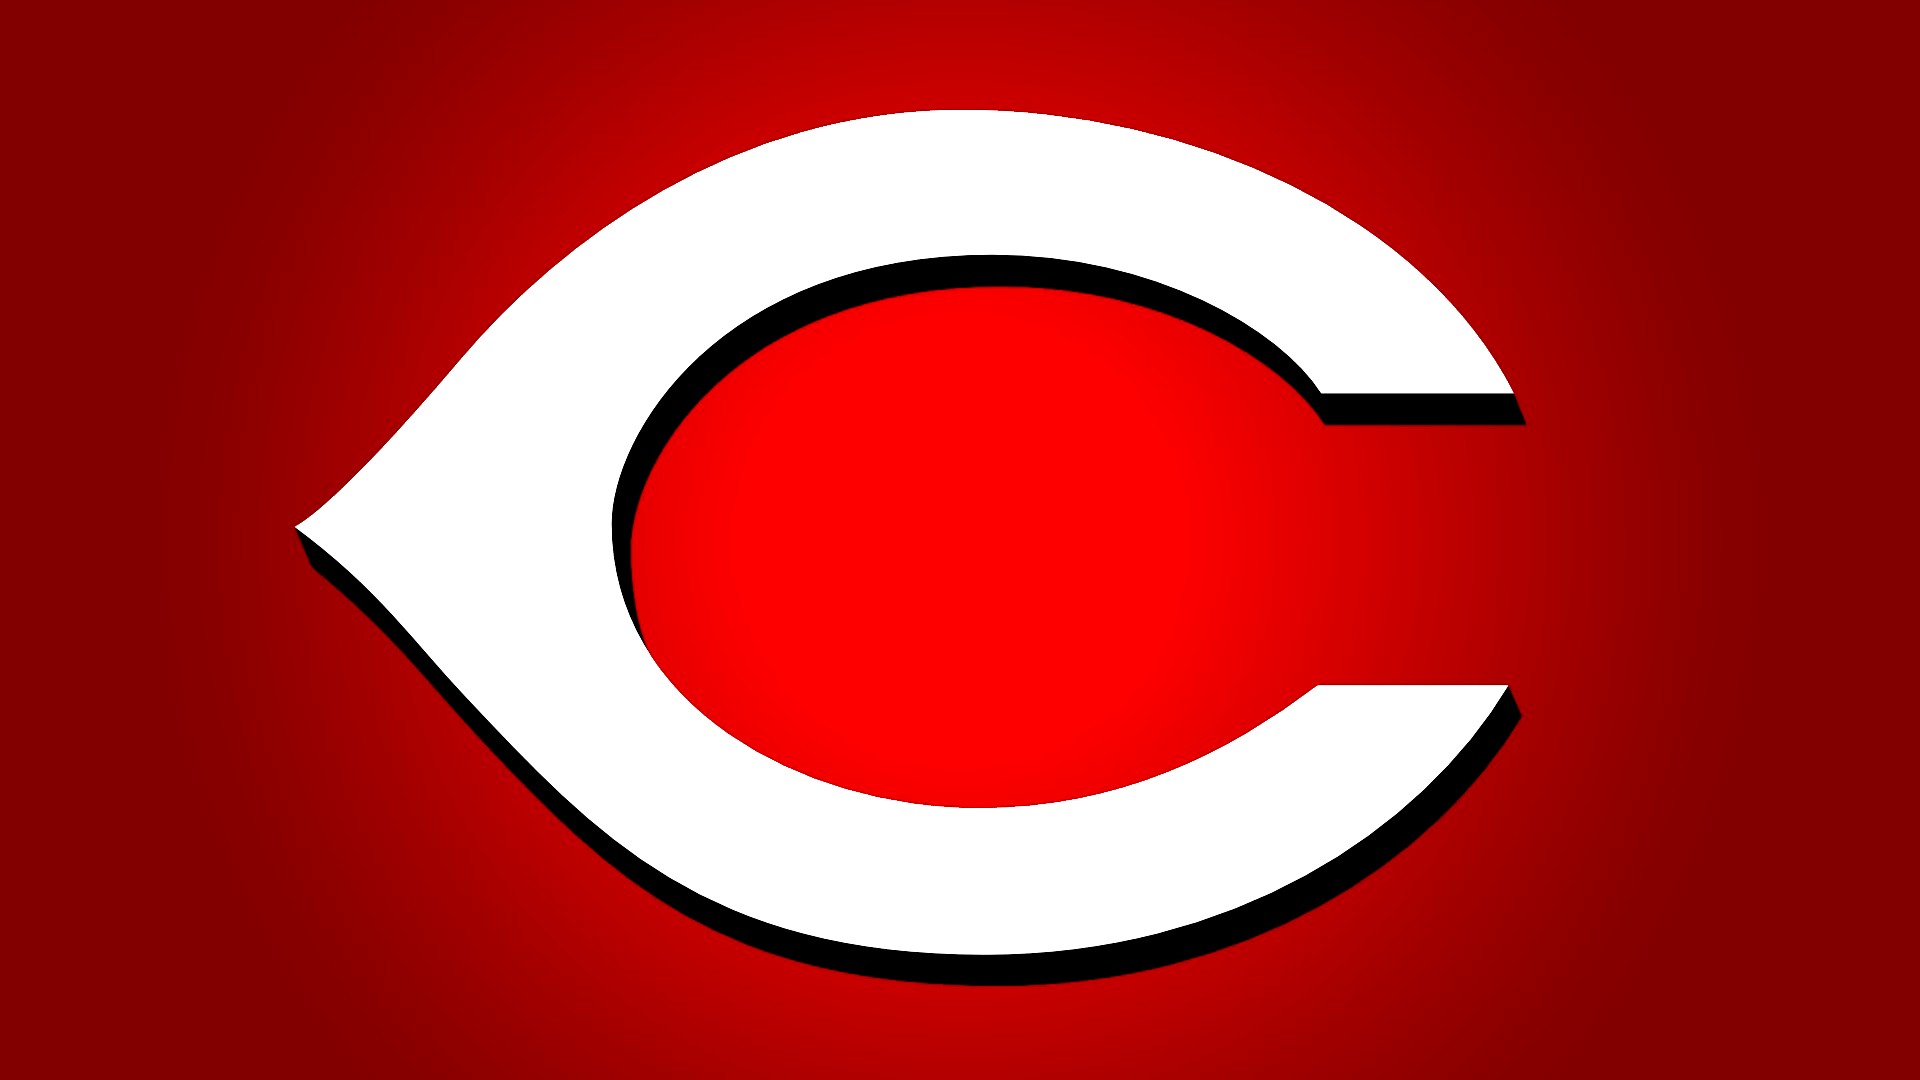 Wallpapers HD Cincinnati Reds with high-resolution 1920x1080 pixel. You can use this wallpaper for Mac Desktop Wallpaper, Laptop Screensavers, Android Wallpapers, Tablet or iPhone Home Screen and another mobile phone device